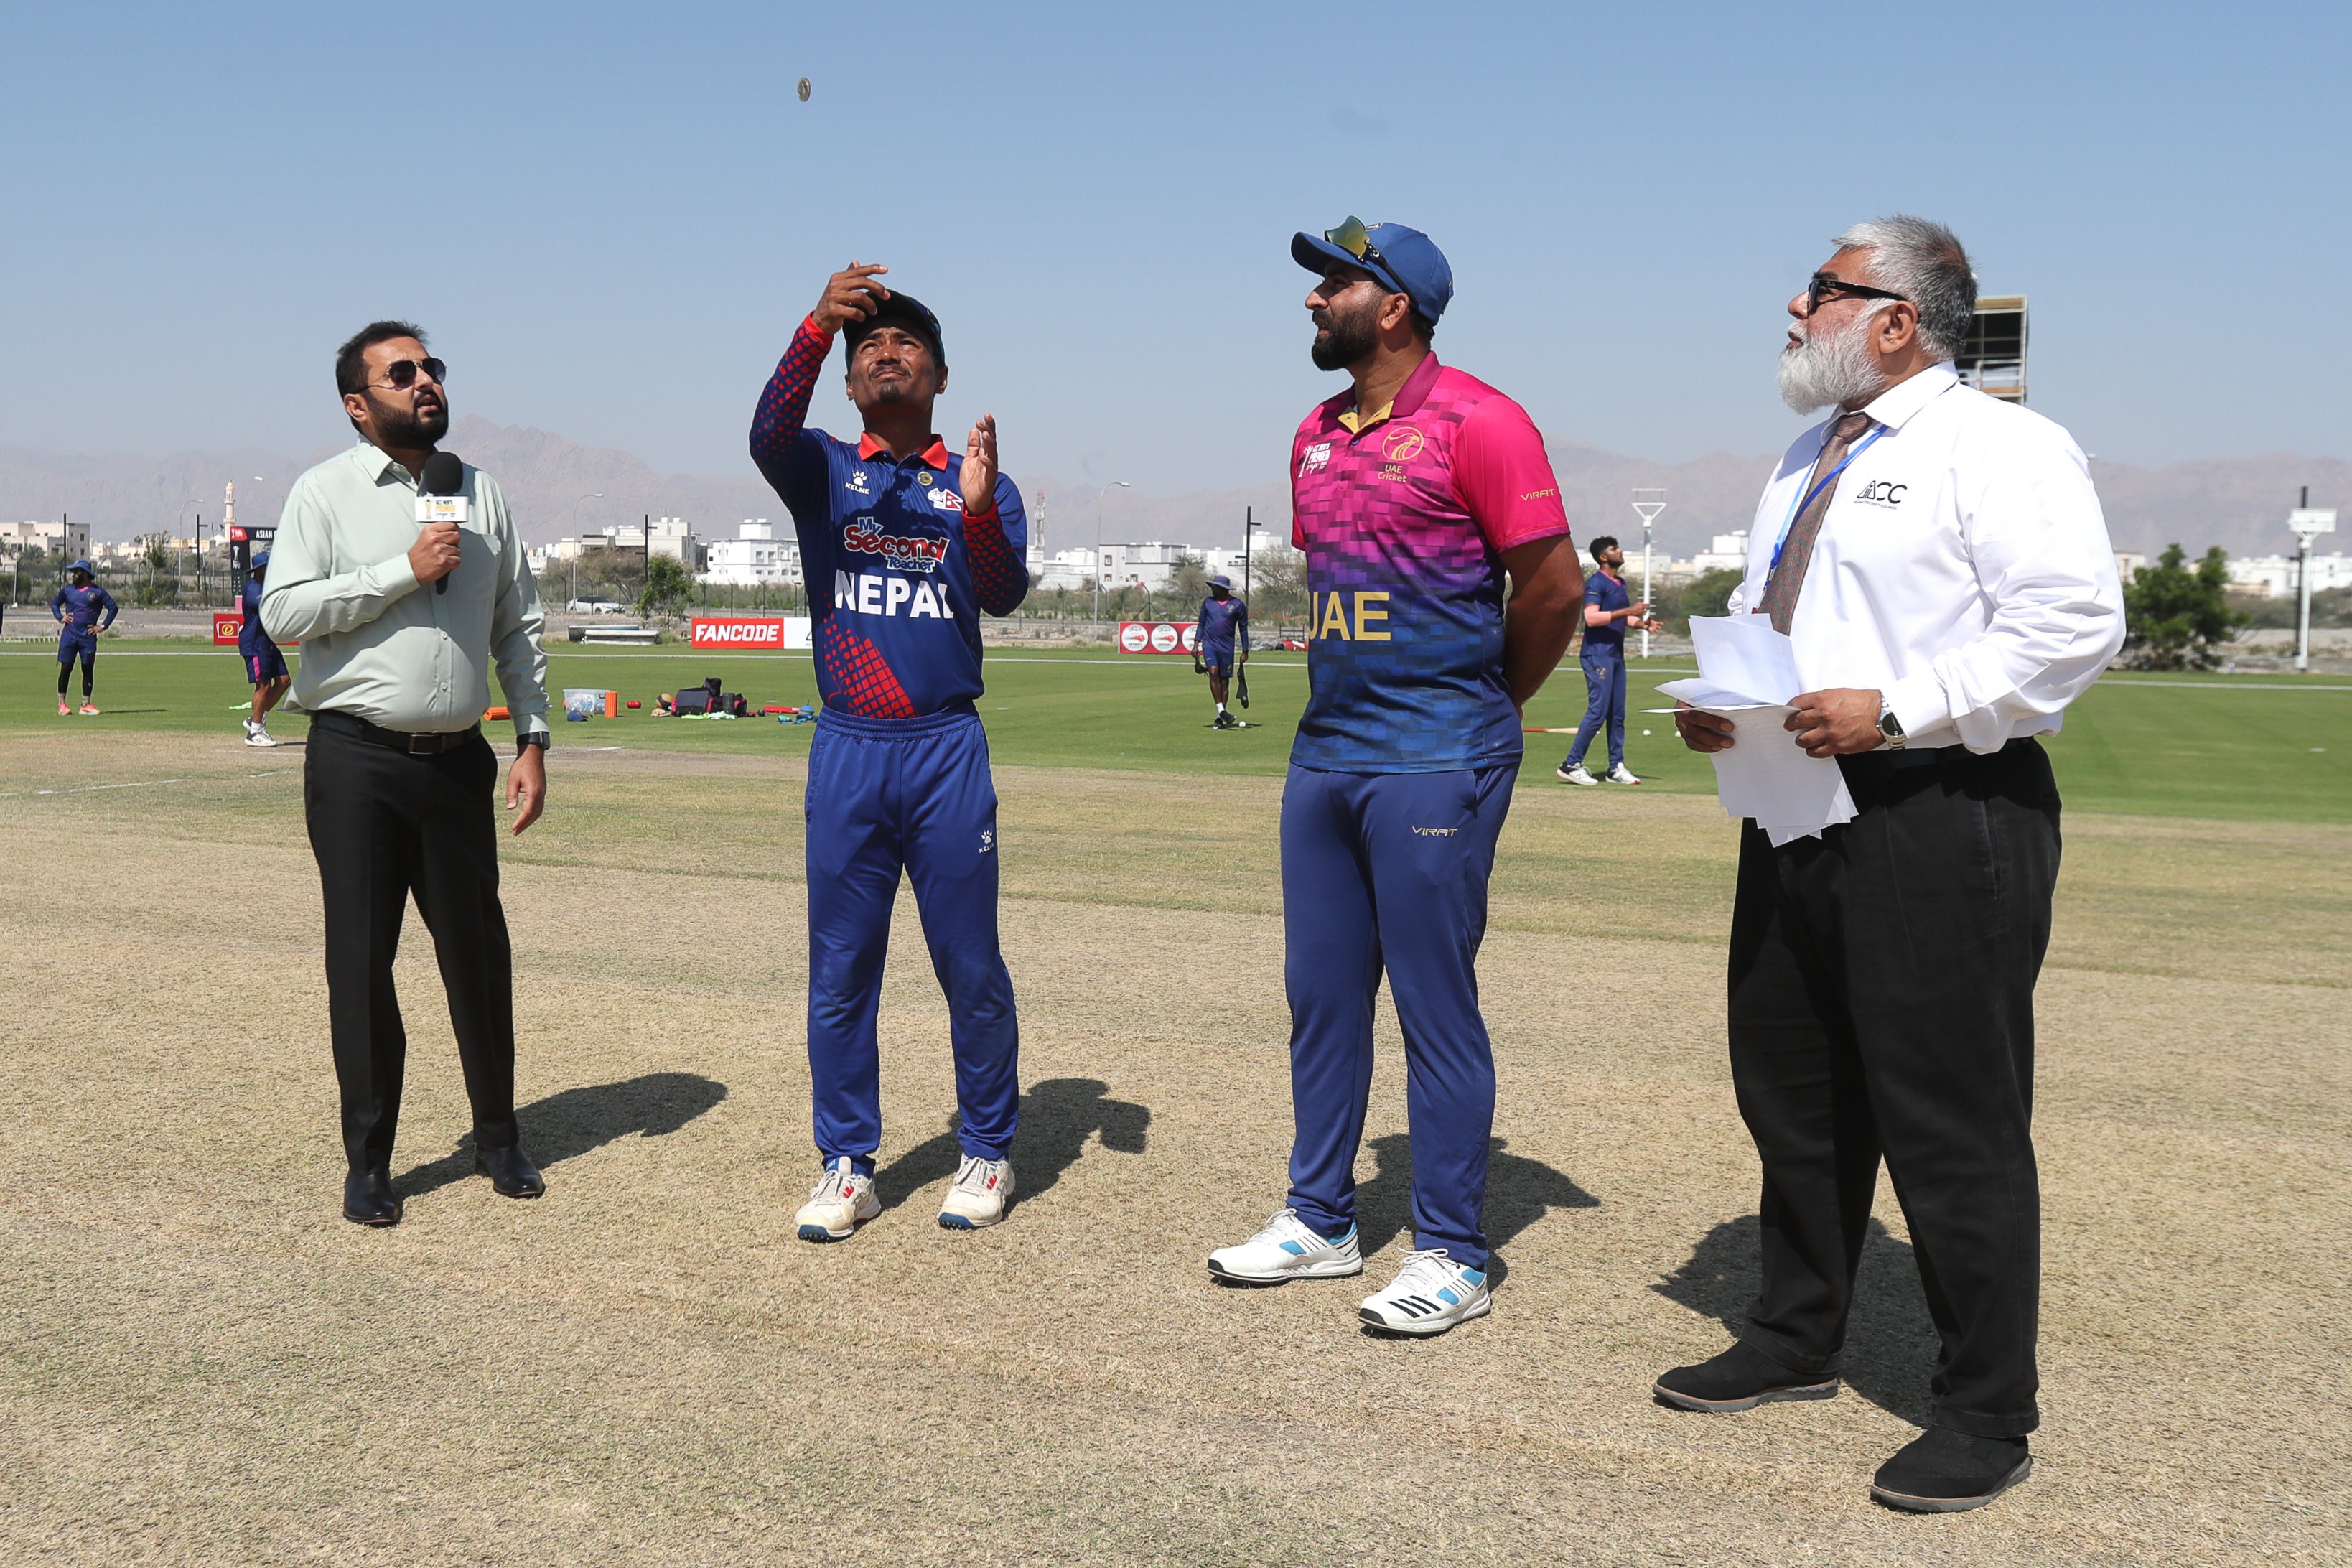 UAE opts to bowl first against Nepal ACC Premier Cup semi-finals